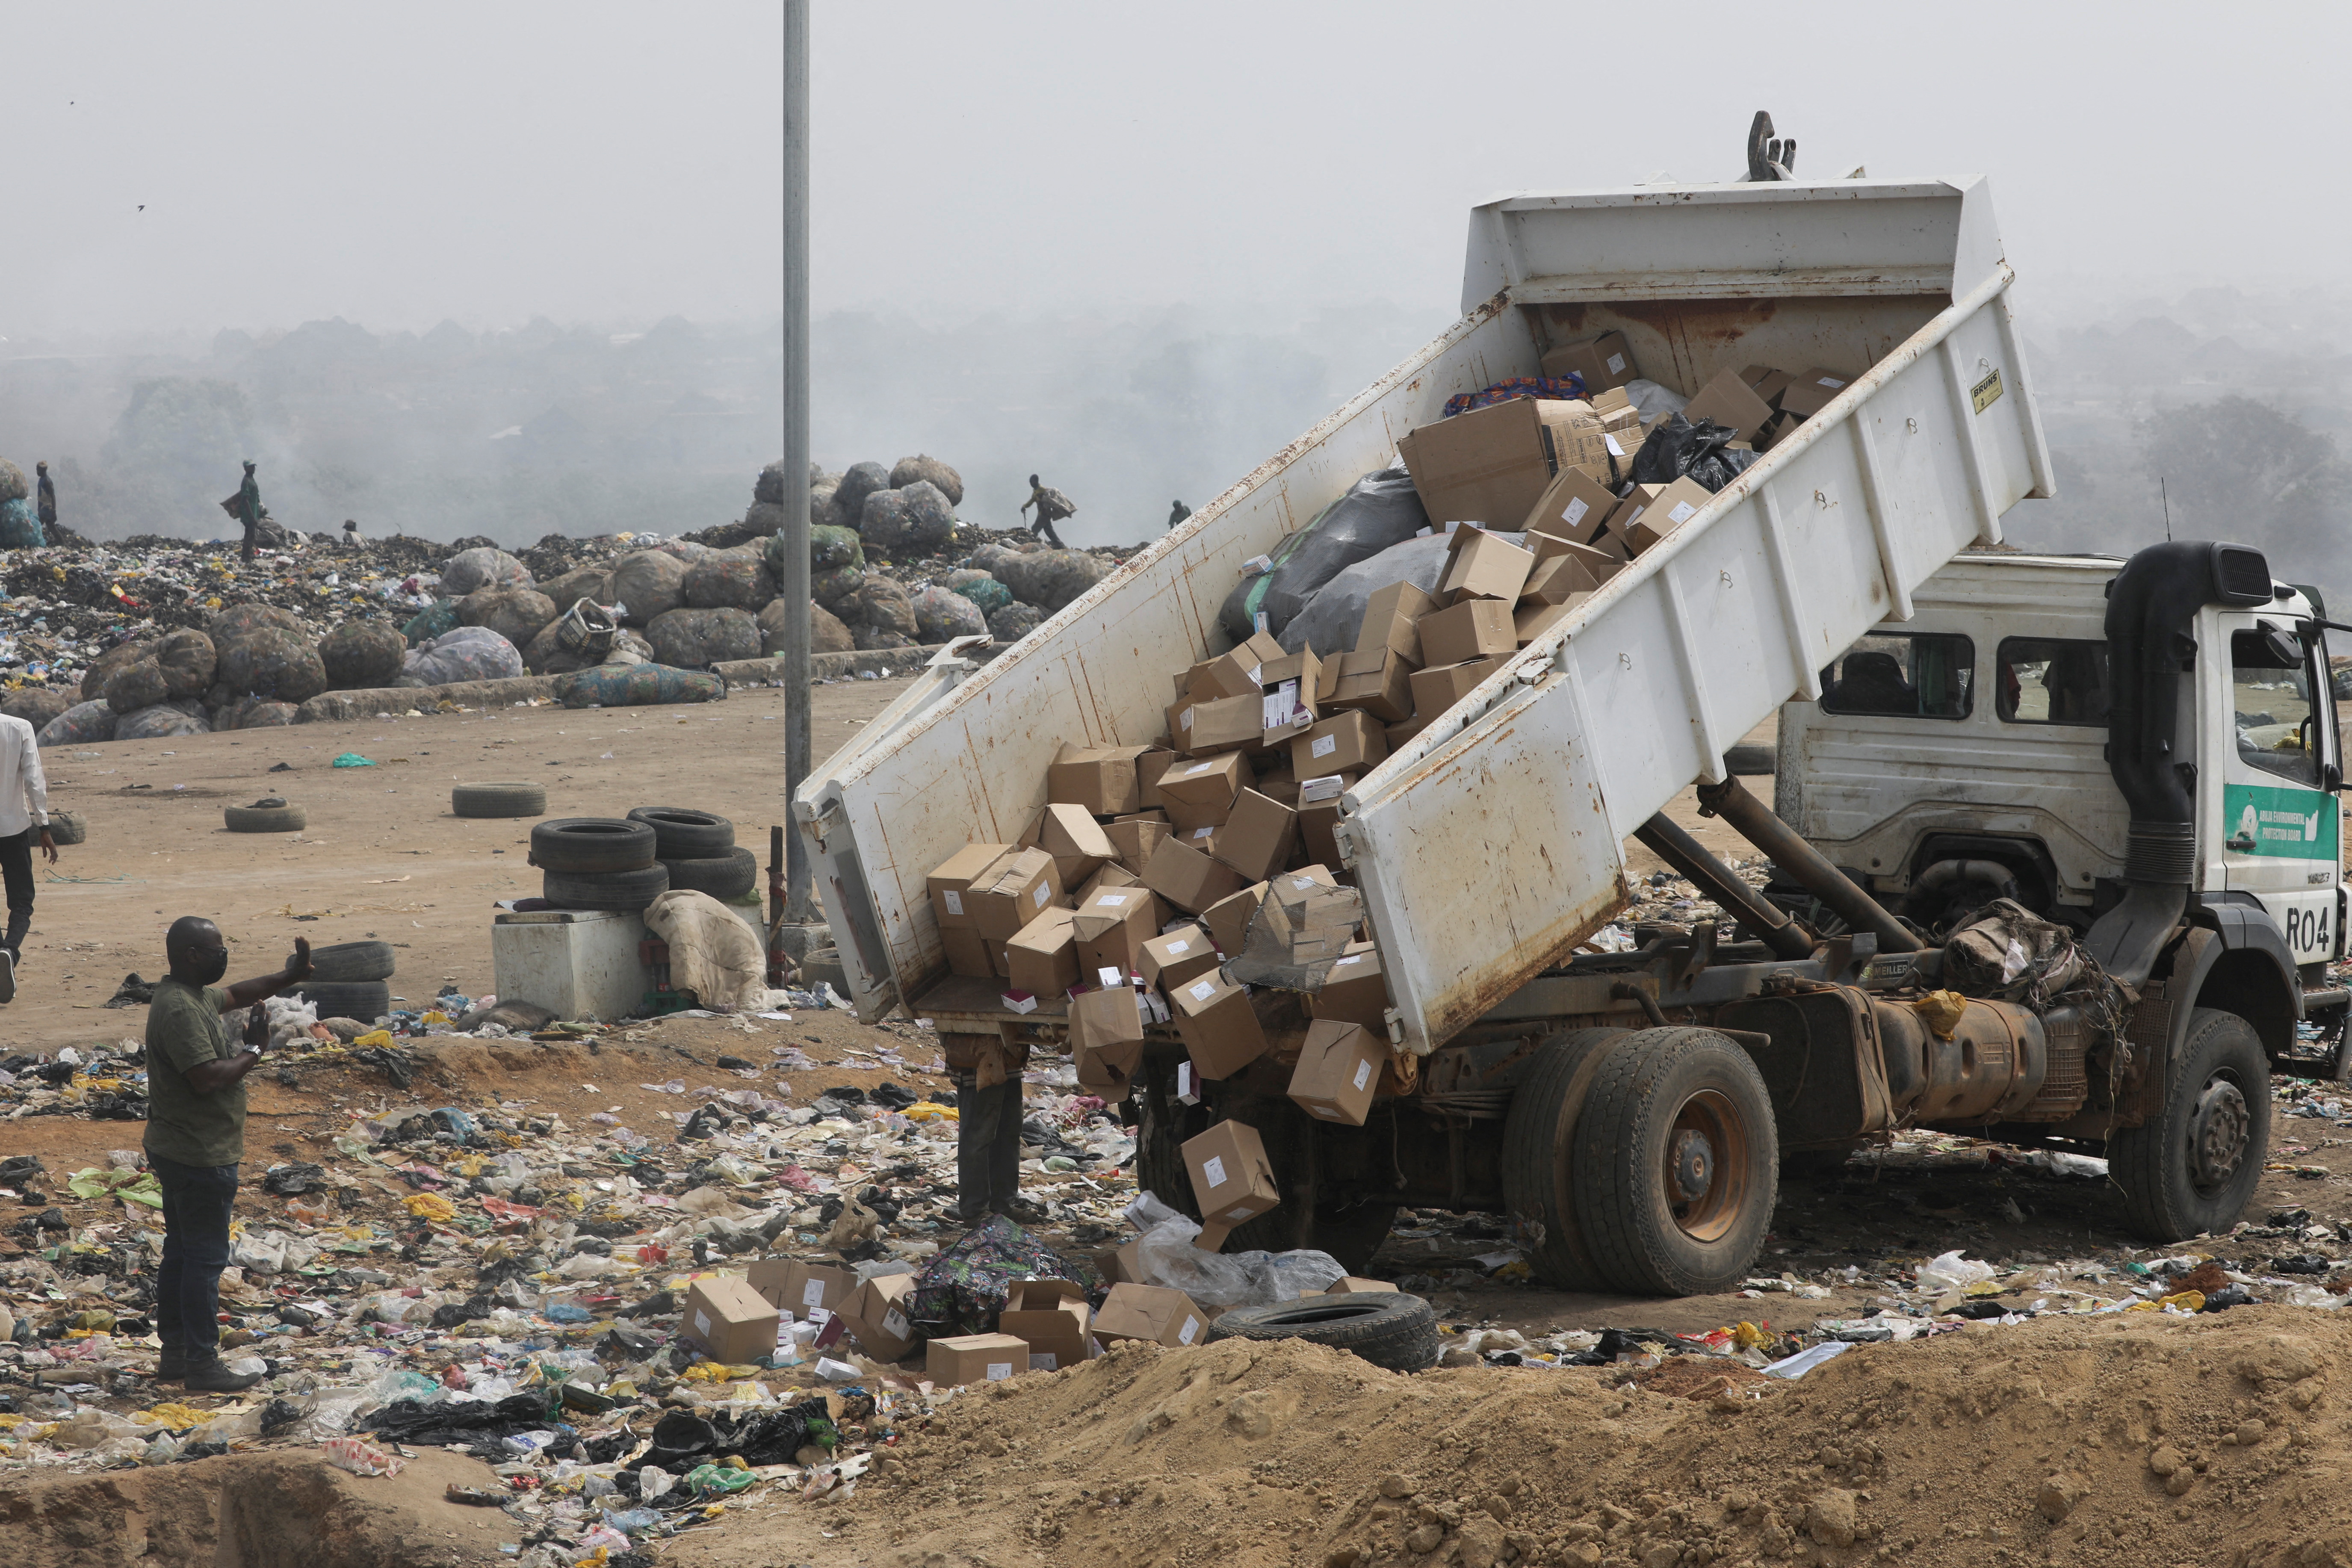 A truck offloads expired AstraZeneca COVID-19 vaccines at the Gosa dump site in Abuja